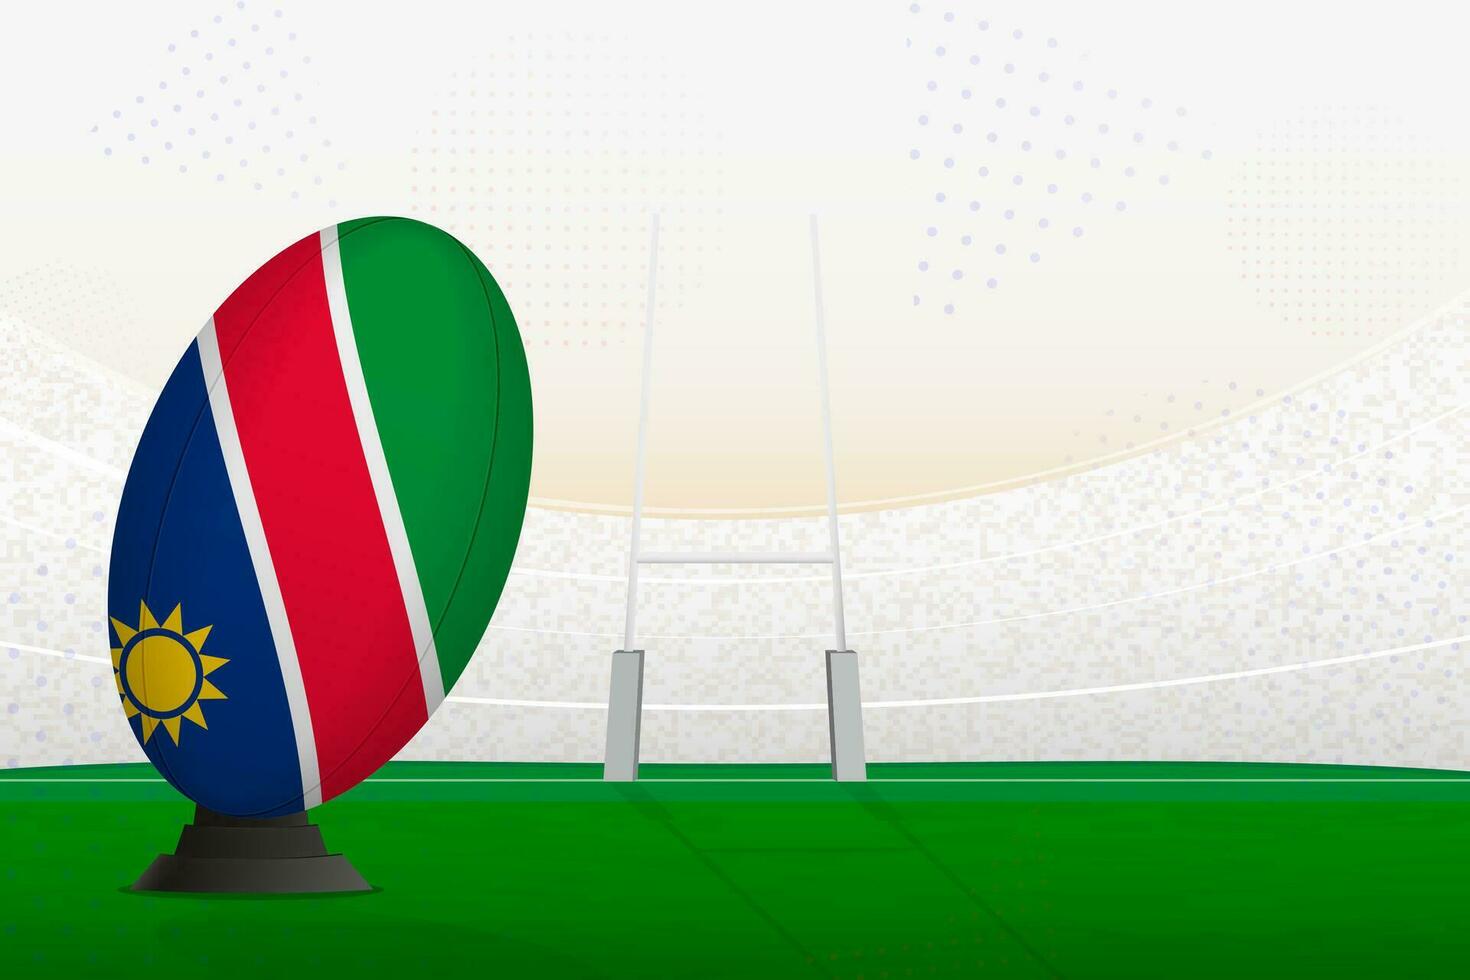 Namibia national team rugby ball on rugby stadium and goal posts, preparing for a penalty or free kick. vector